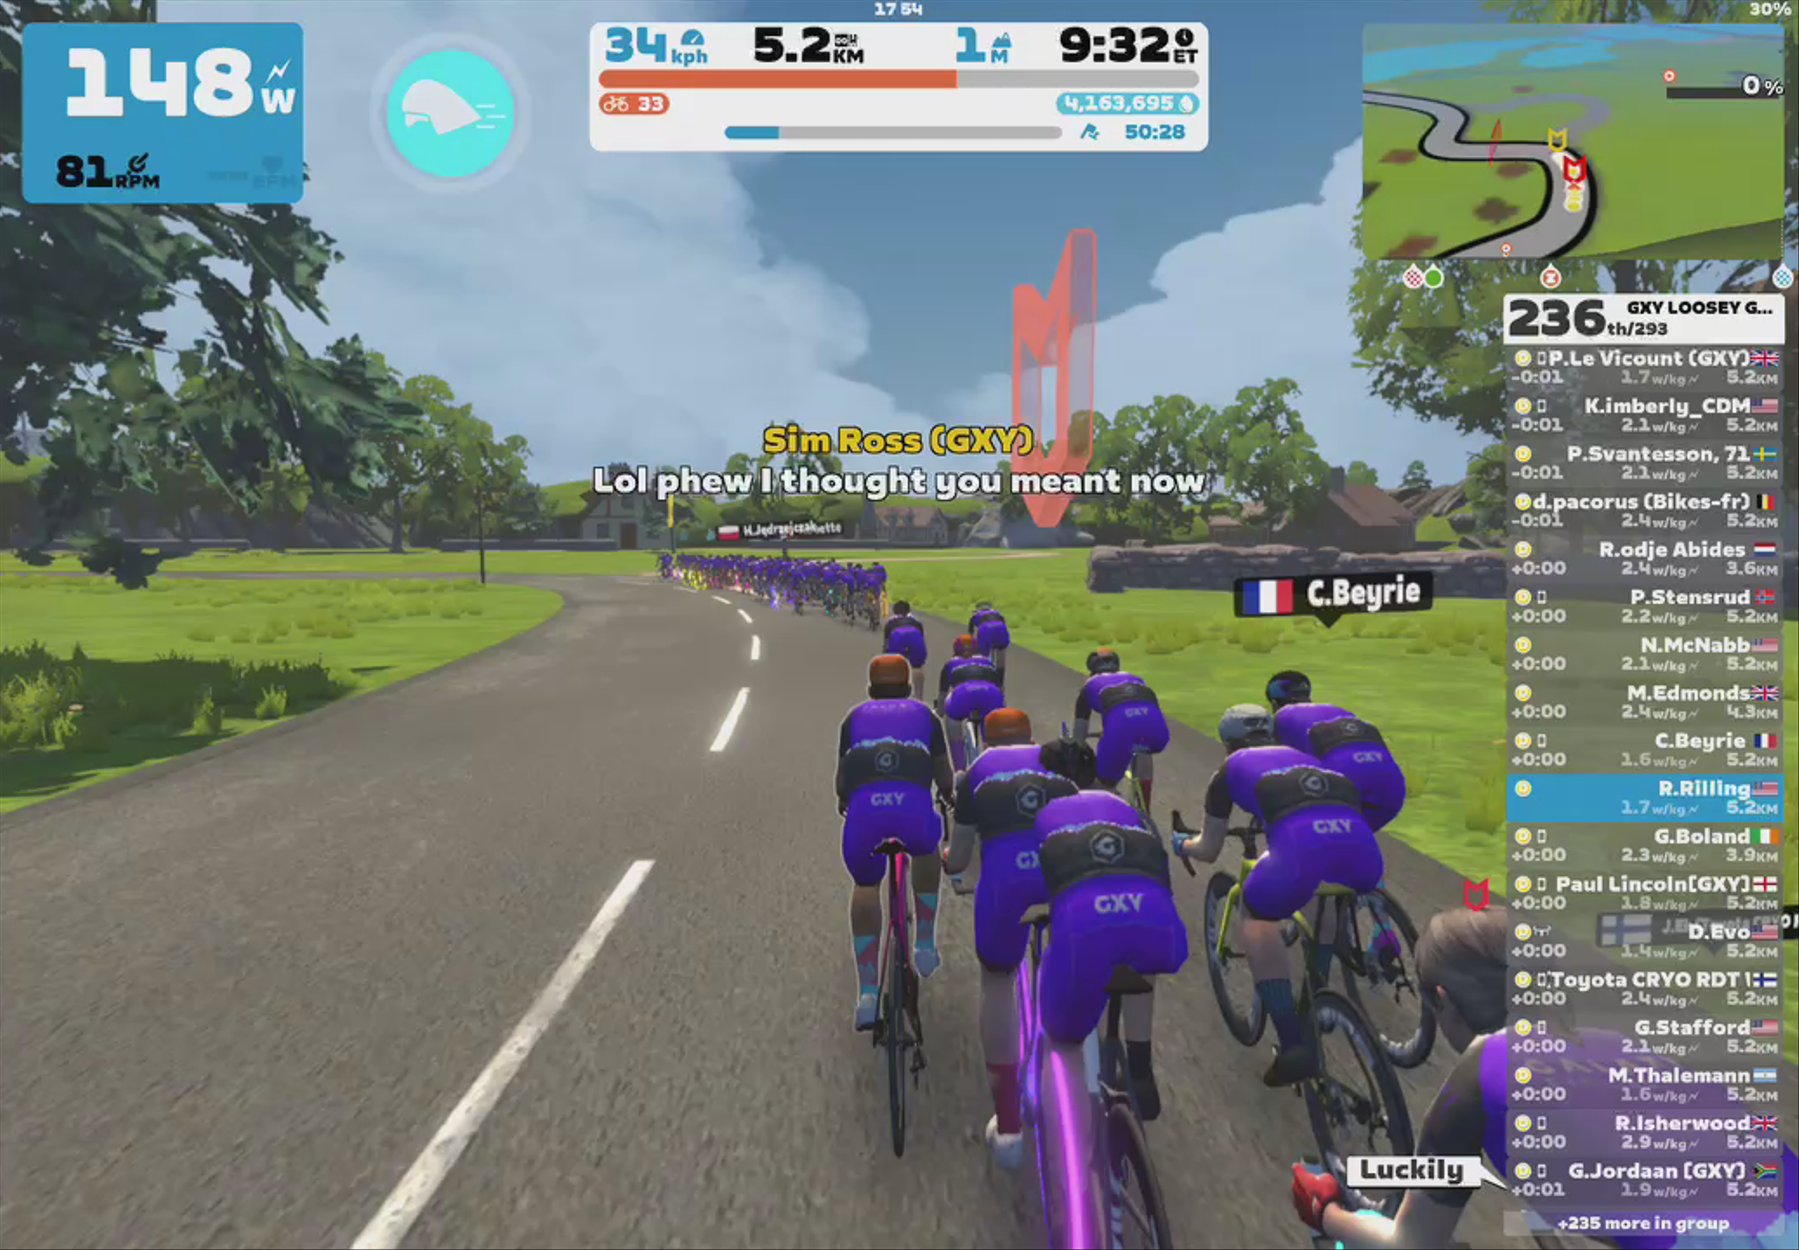 Zwift - Group Ride: GXY LOOSEY GOOSEY [1.6-2.0WKG] CAT D (D) on R.G.V. in France